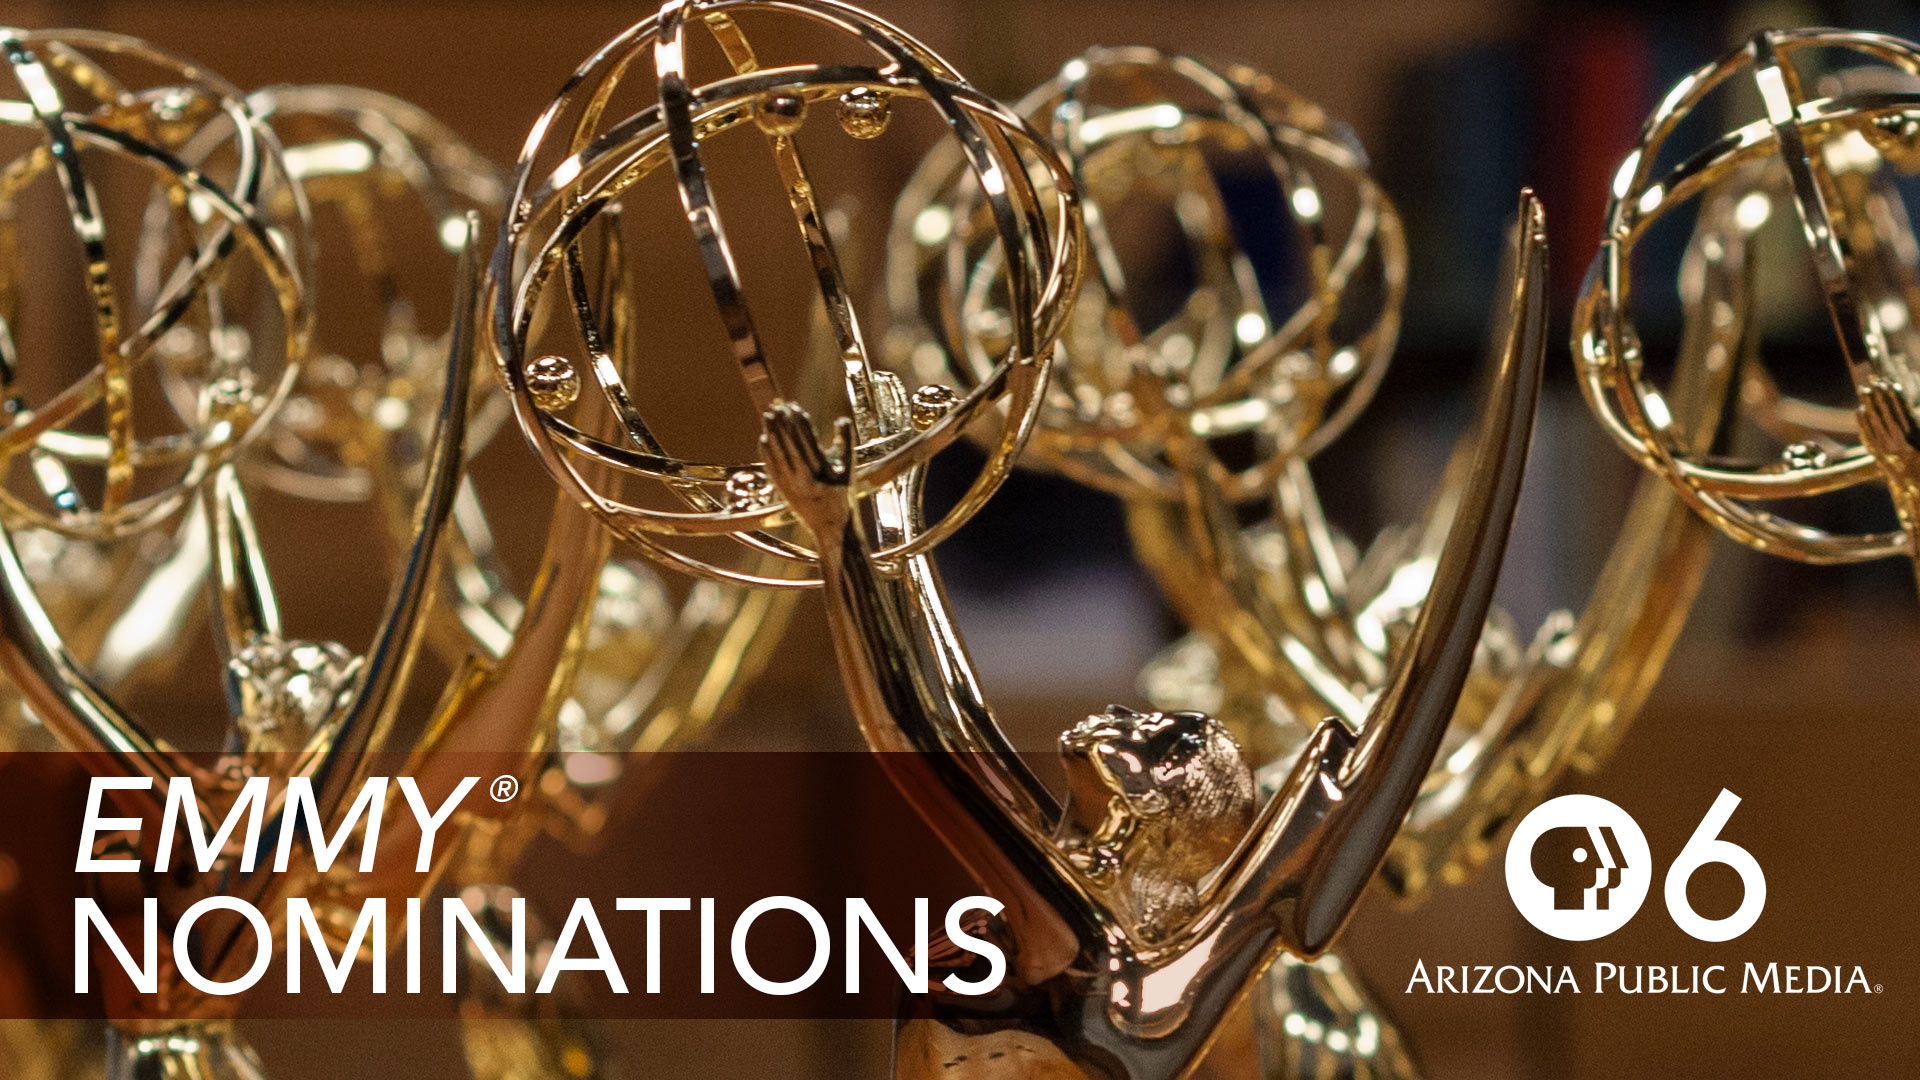 Arizona Public Media (AZPM) staff received 48 individual Emmy® nominations for 21 projects across 17 categories.